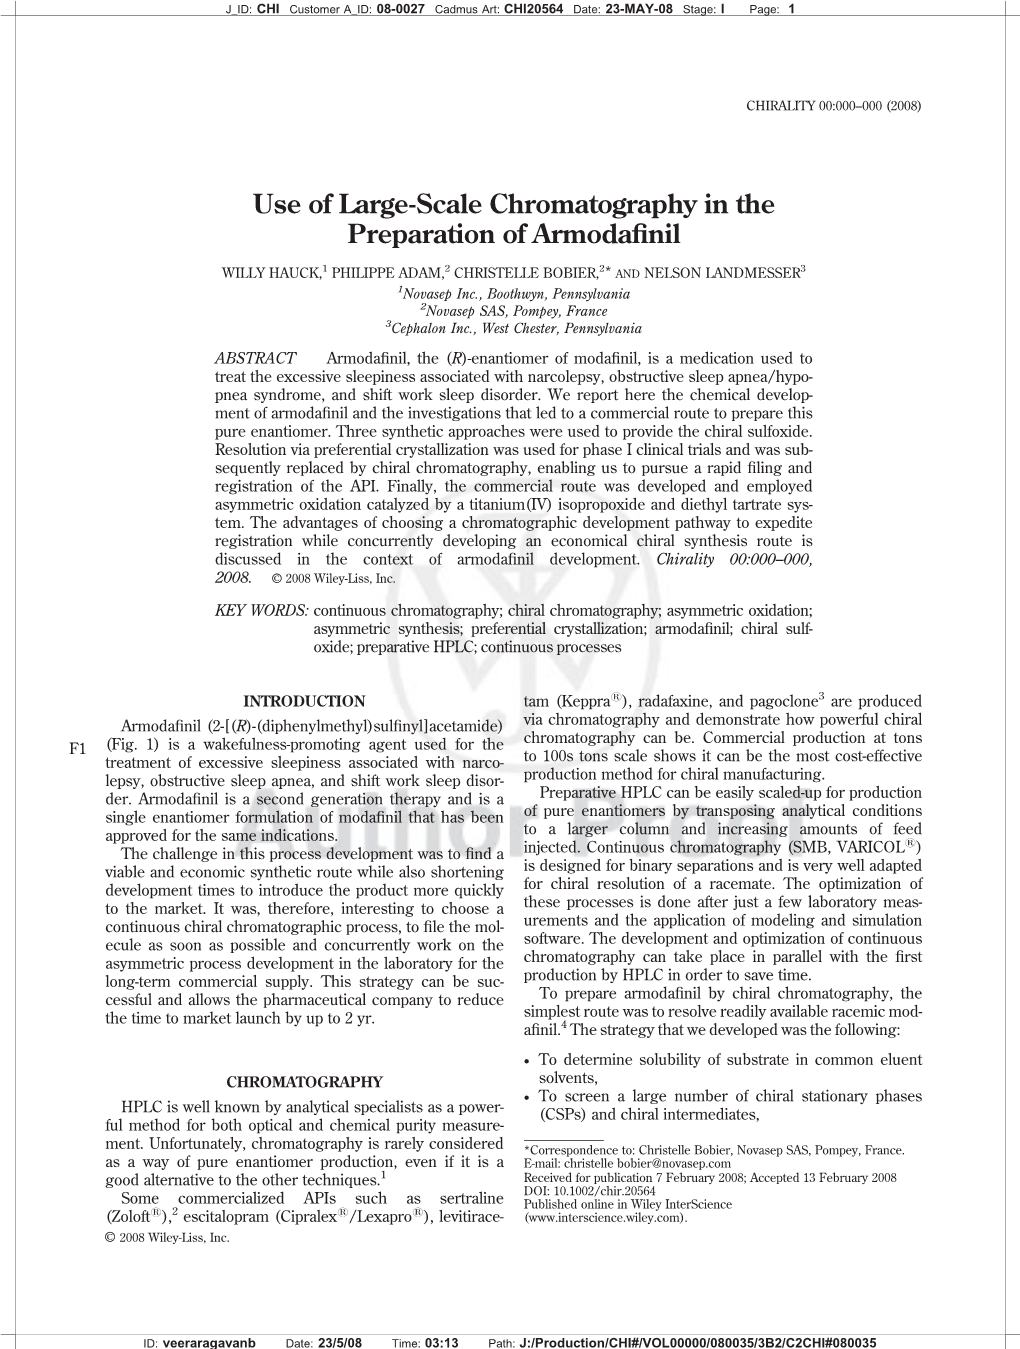 Use of Large-Scale Chromatography in the Preparation of Armodafinil